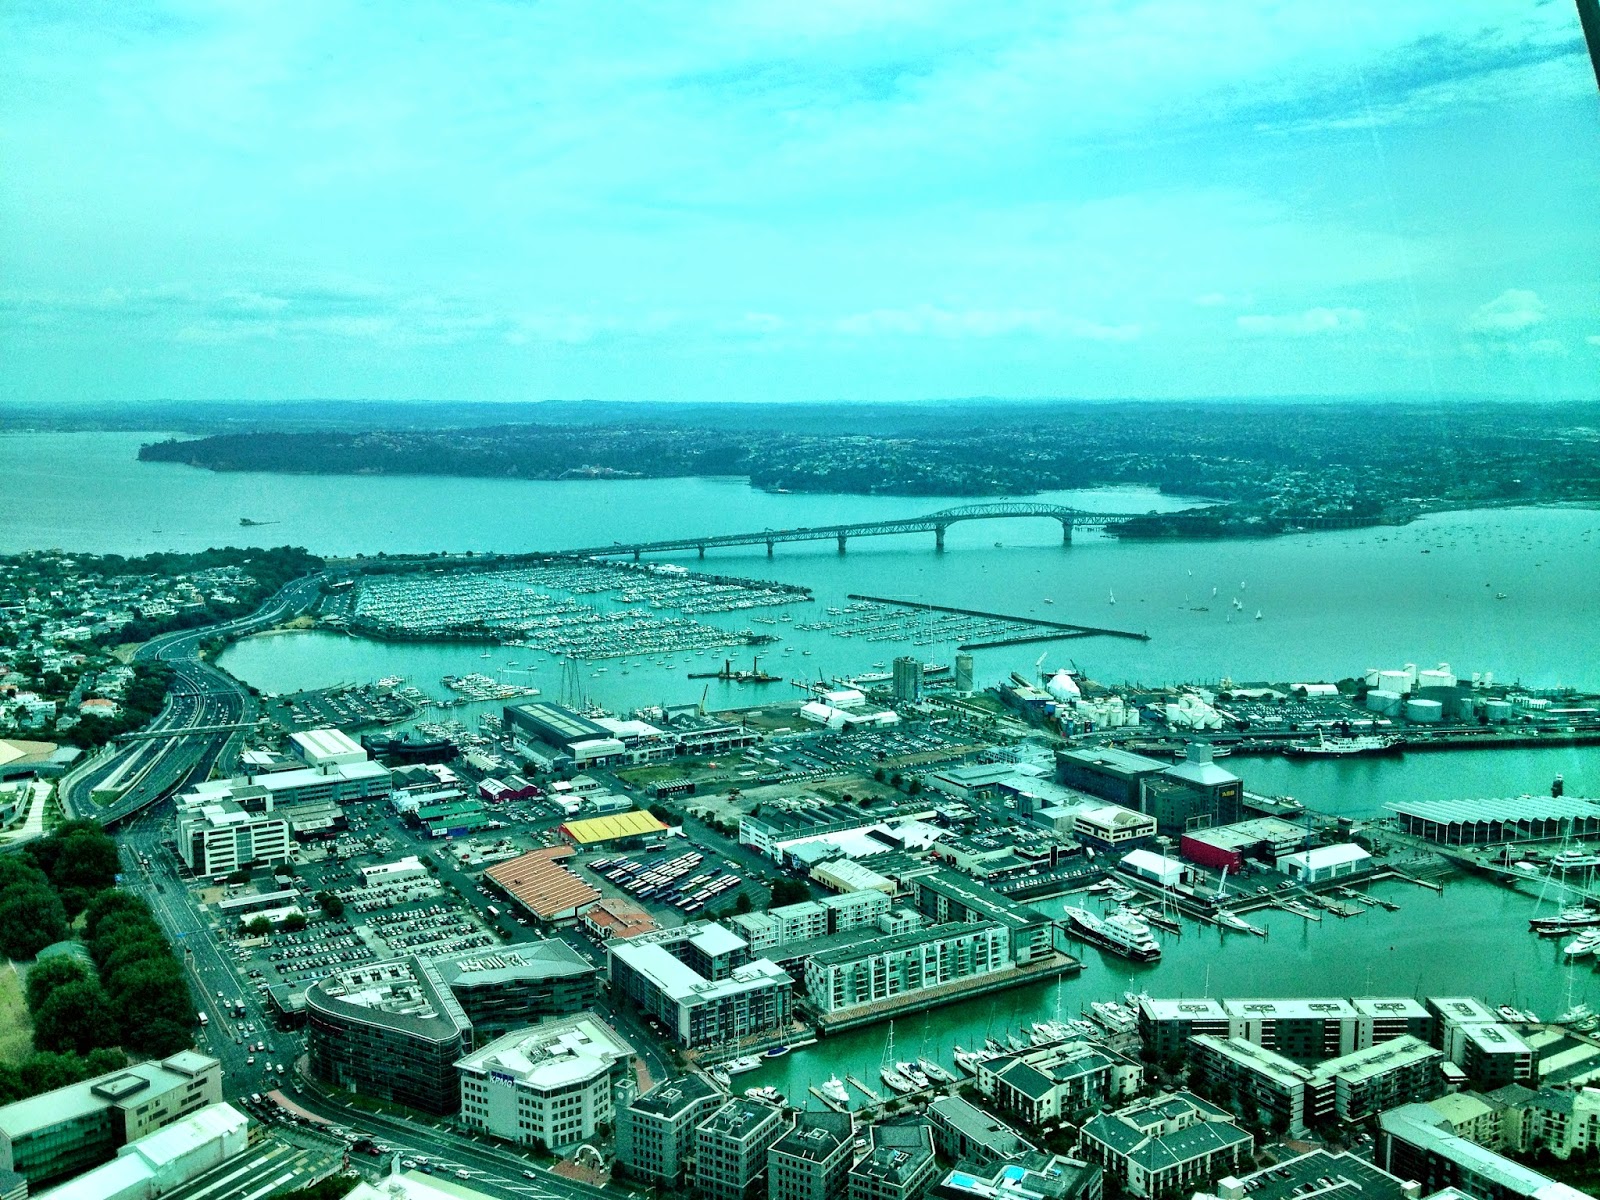 Looking North from the observation deck of the Sky Tower, Auckland